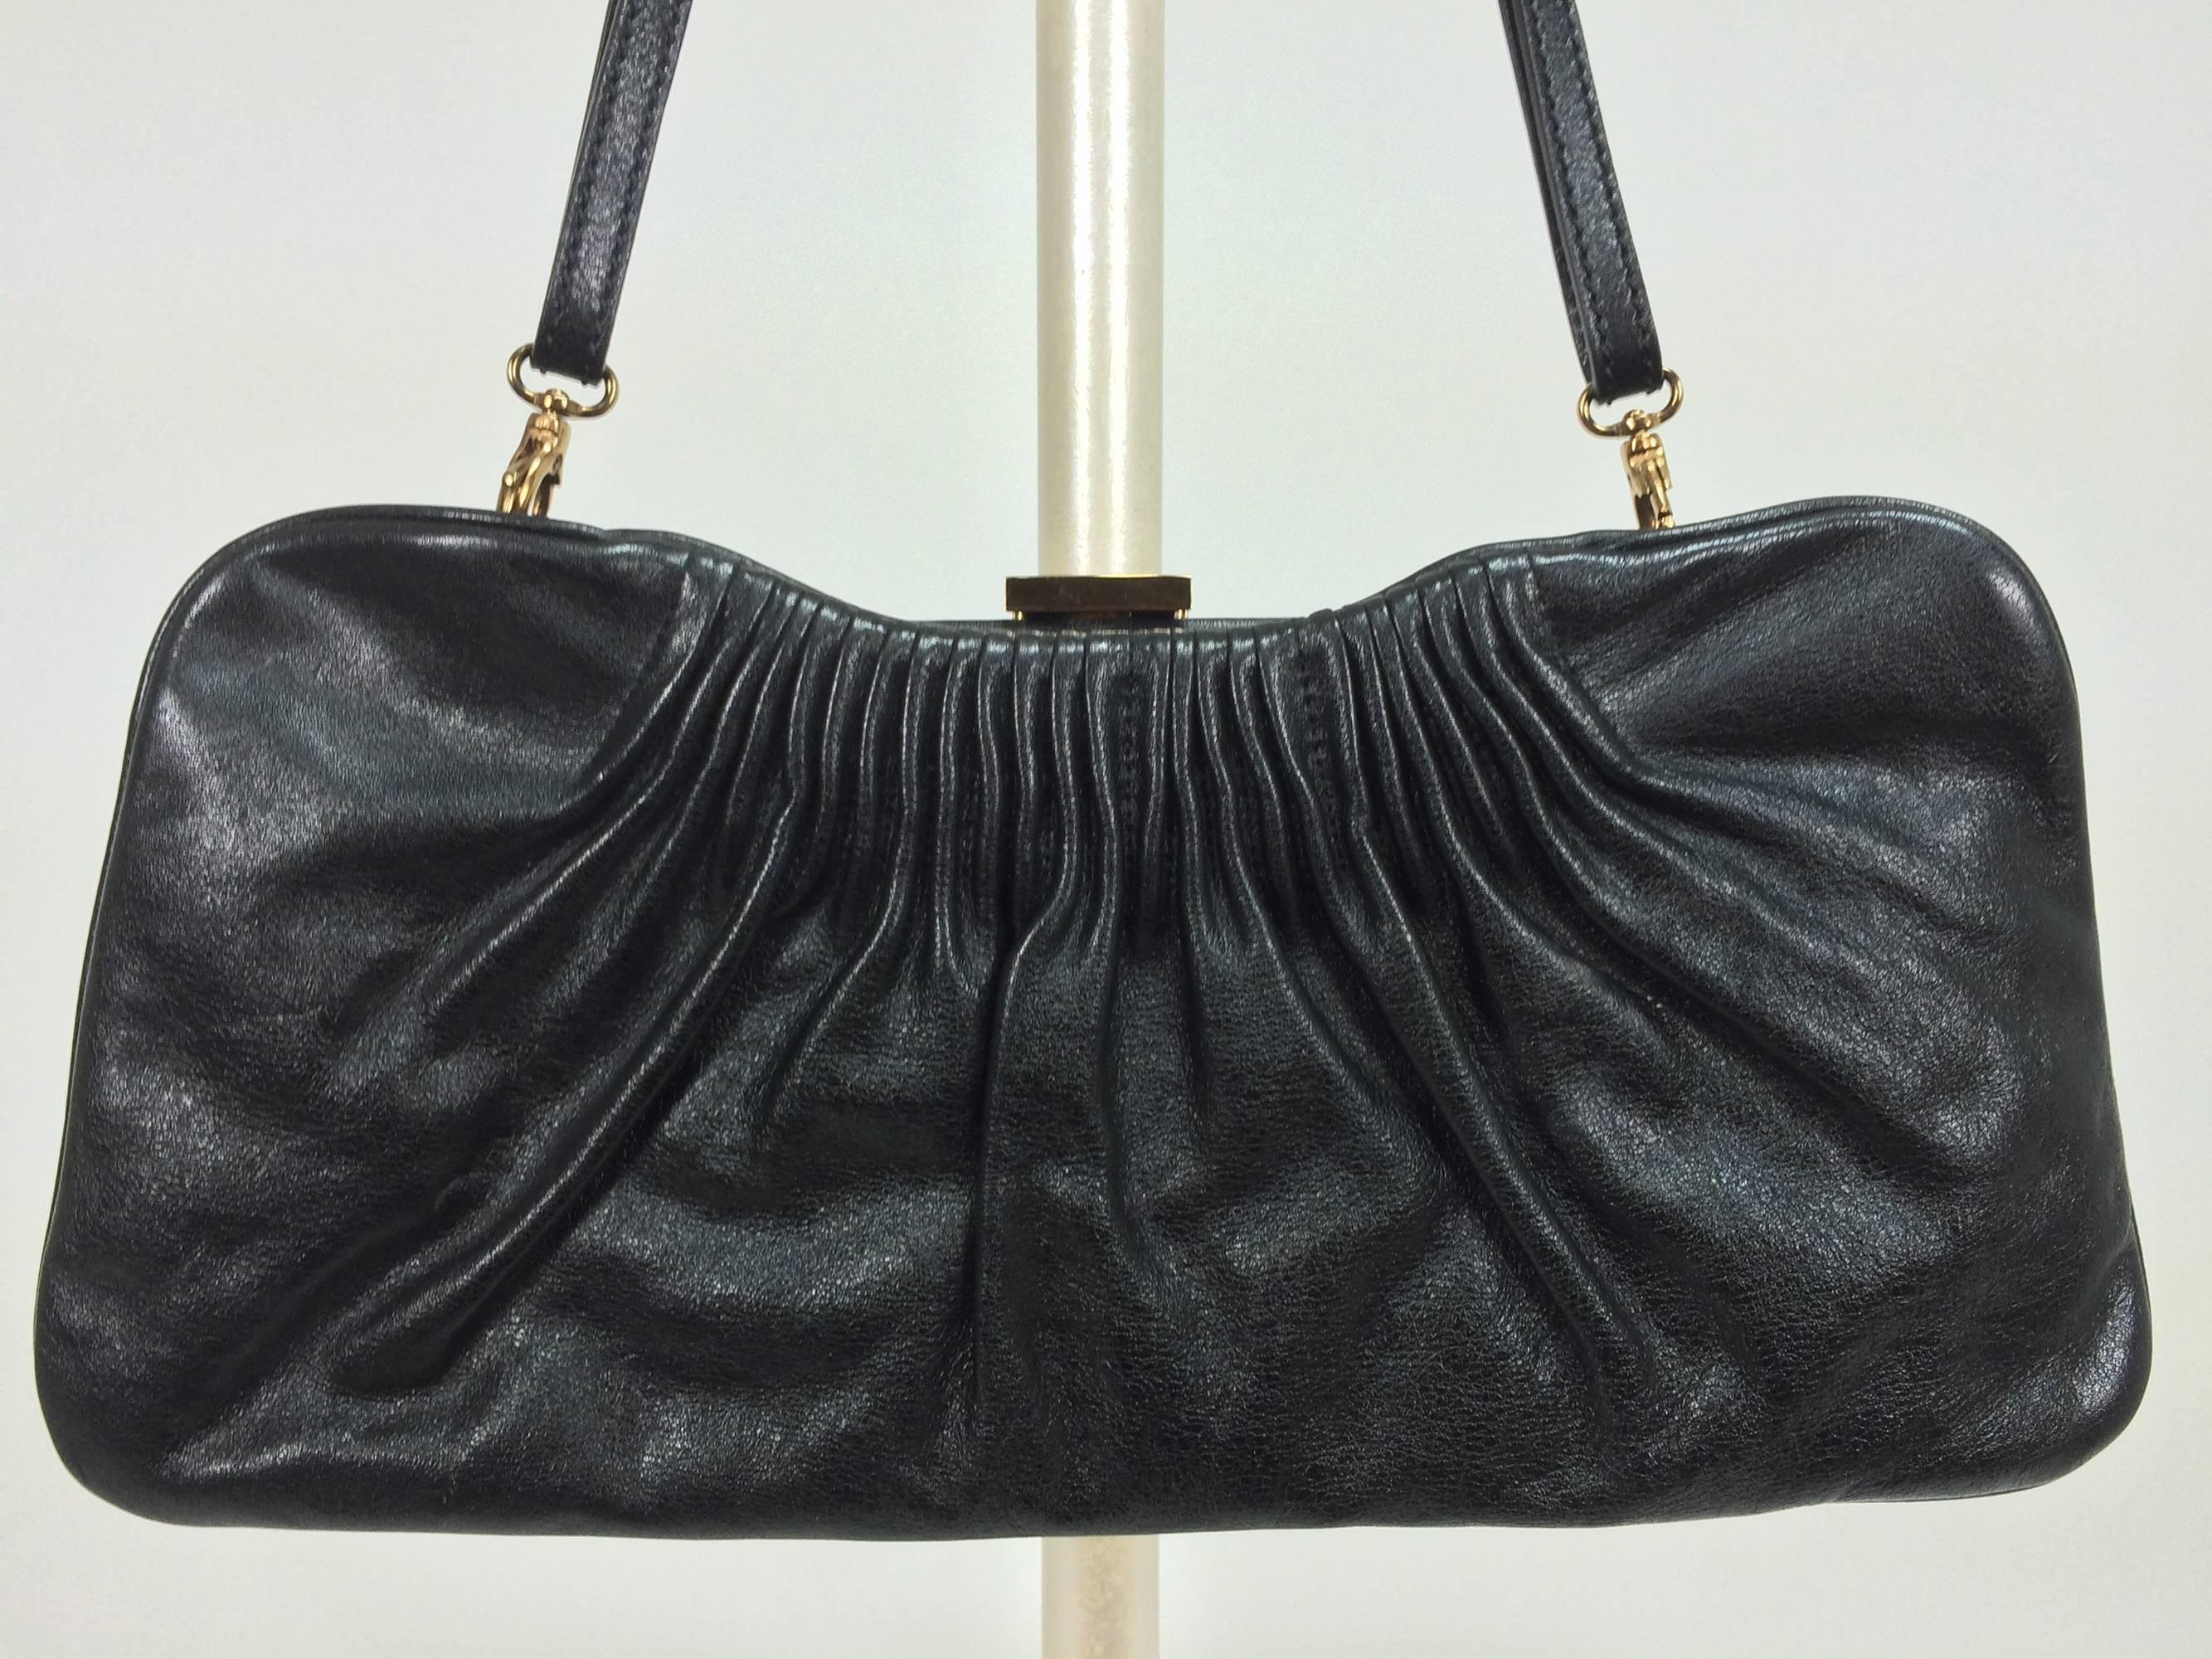 Escada black leather frame bag convertible clutch or shoulder handbag...Black leather frame bag has gold logo clasp and attachments for the removable strap...The bag is pleated at the top on both sides...Inside the bag is lined in brown fabric,